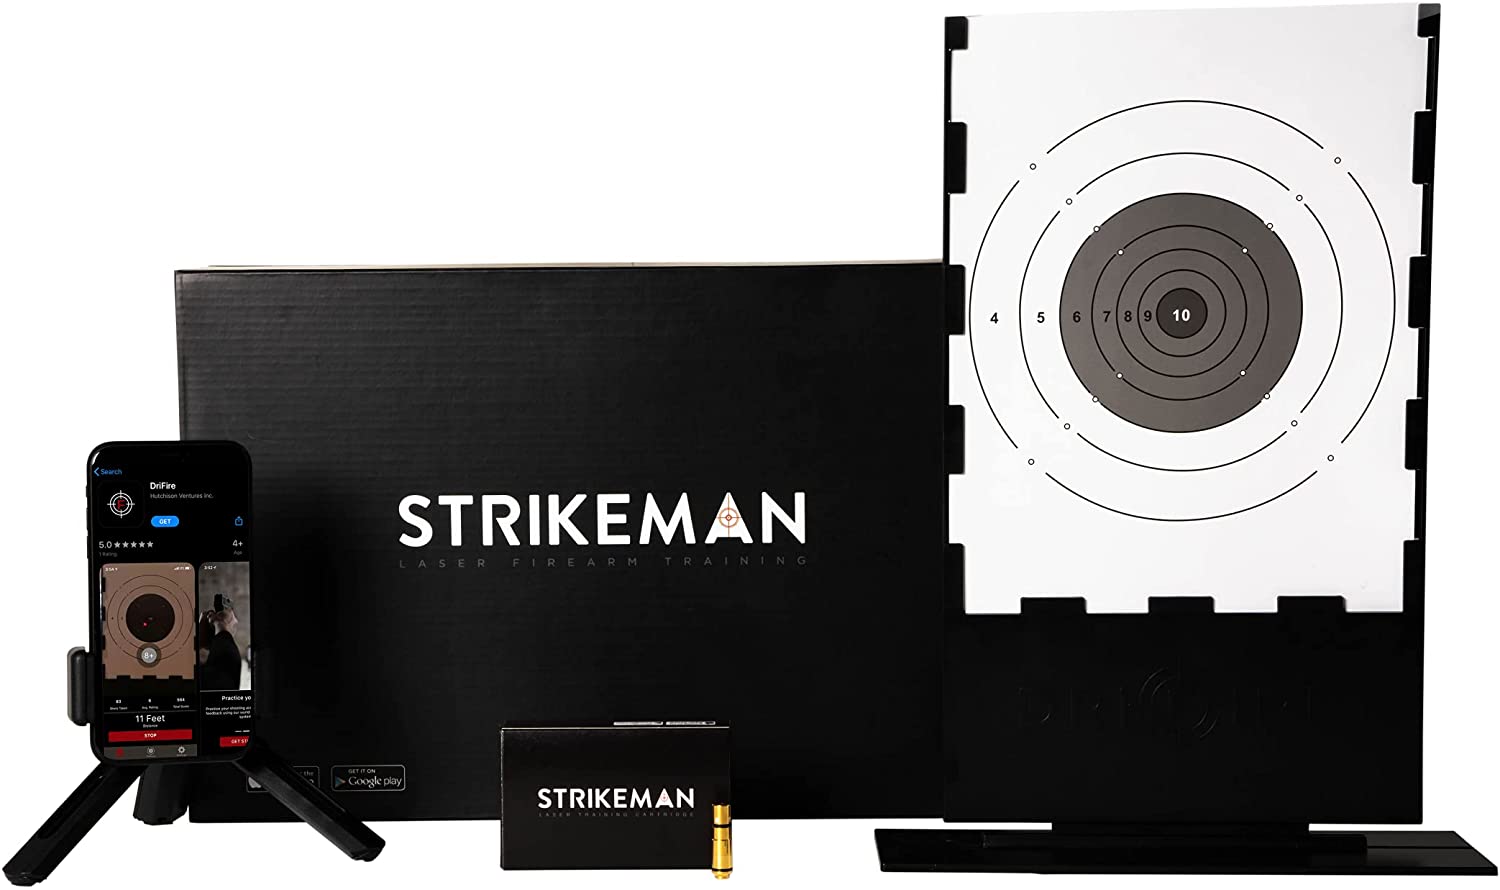 Strikeman - Dry Fire Training Kit with .303 British Ammo Bullet & Downloadable App